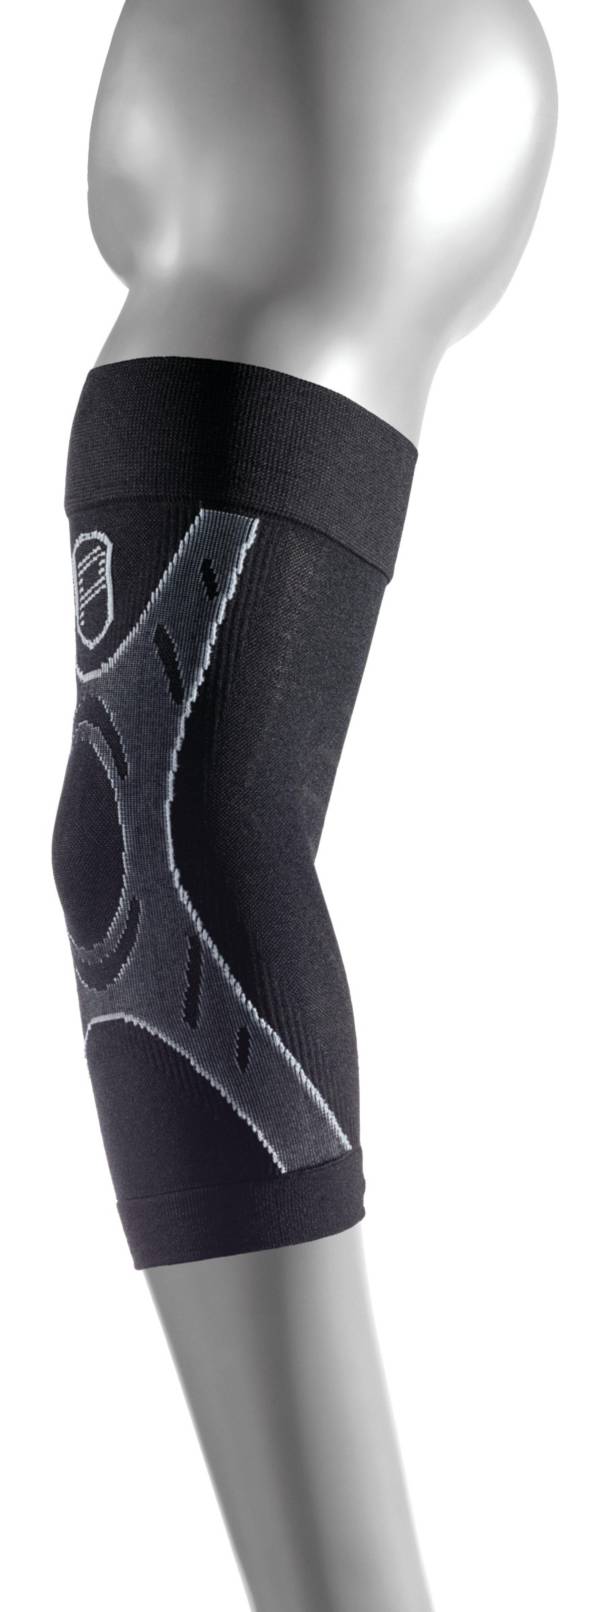 P-TEX PRO Knit Compression Elbow Sleeve product image